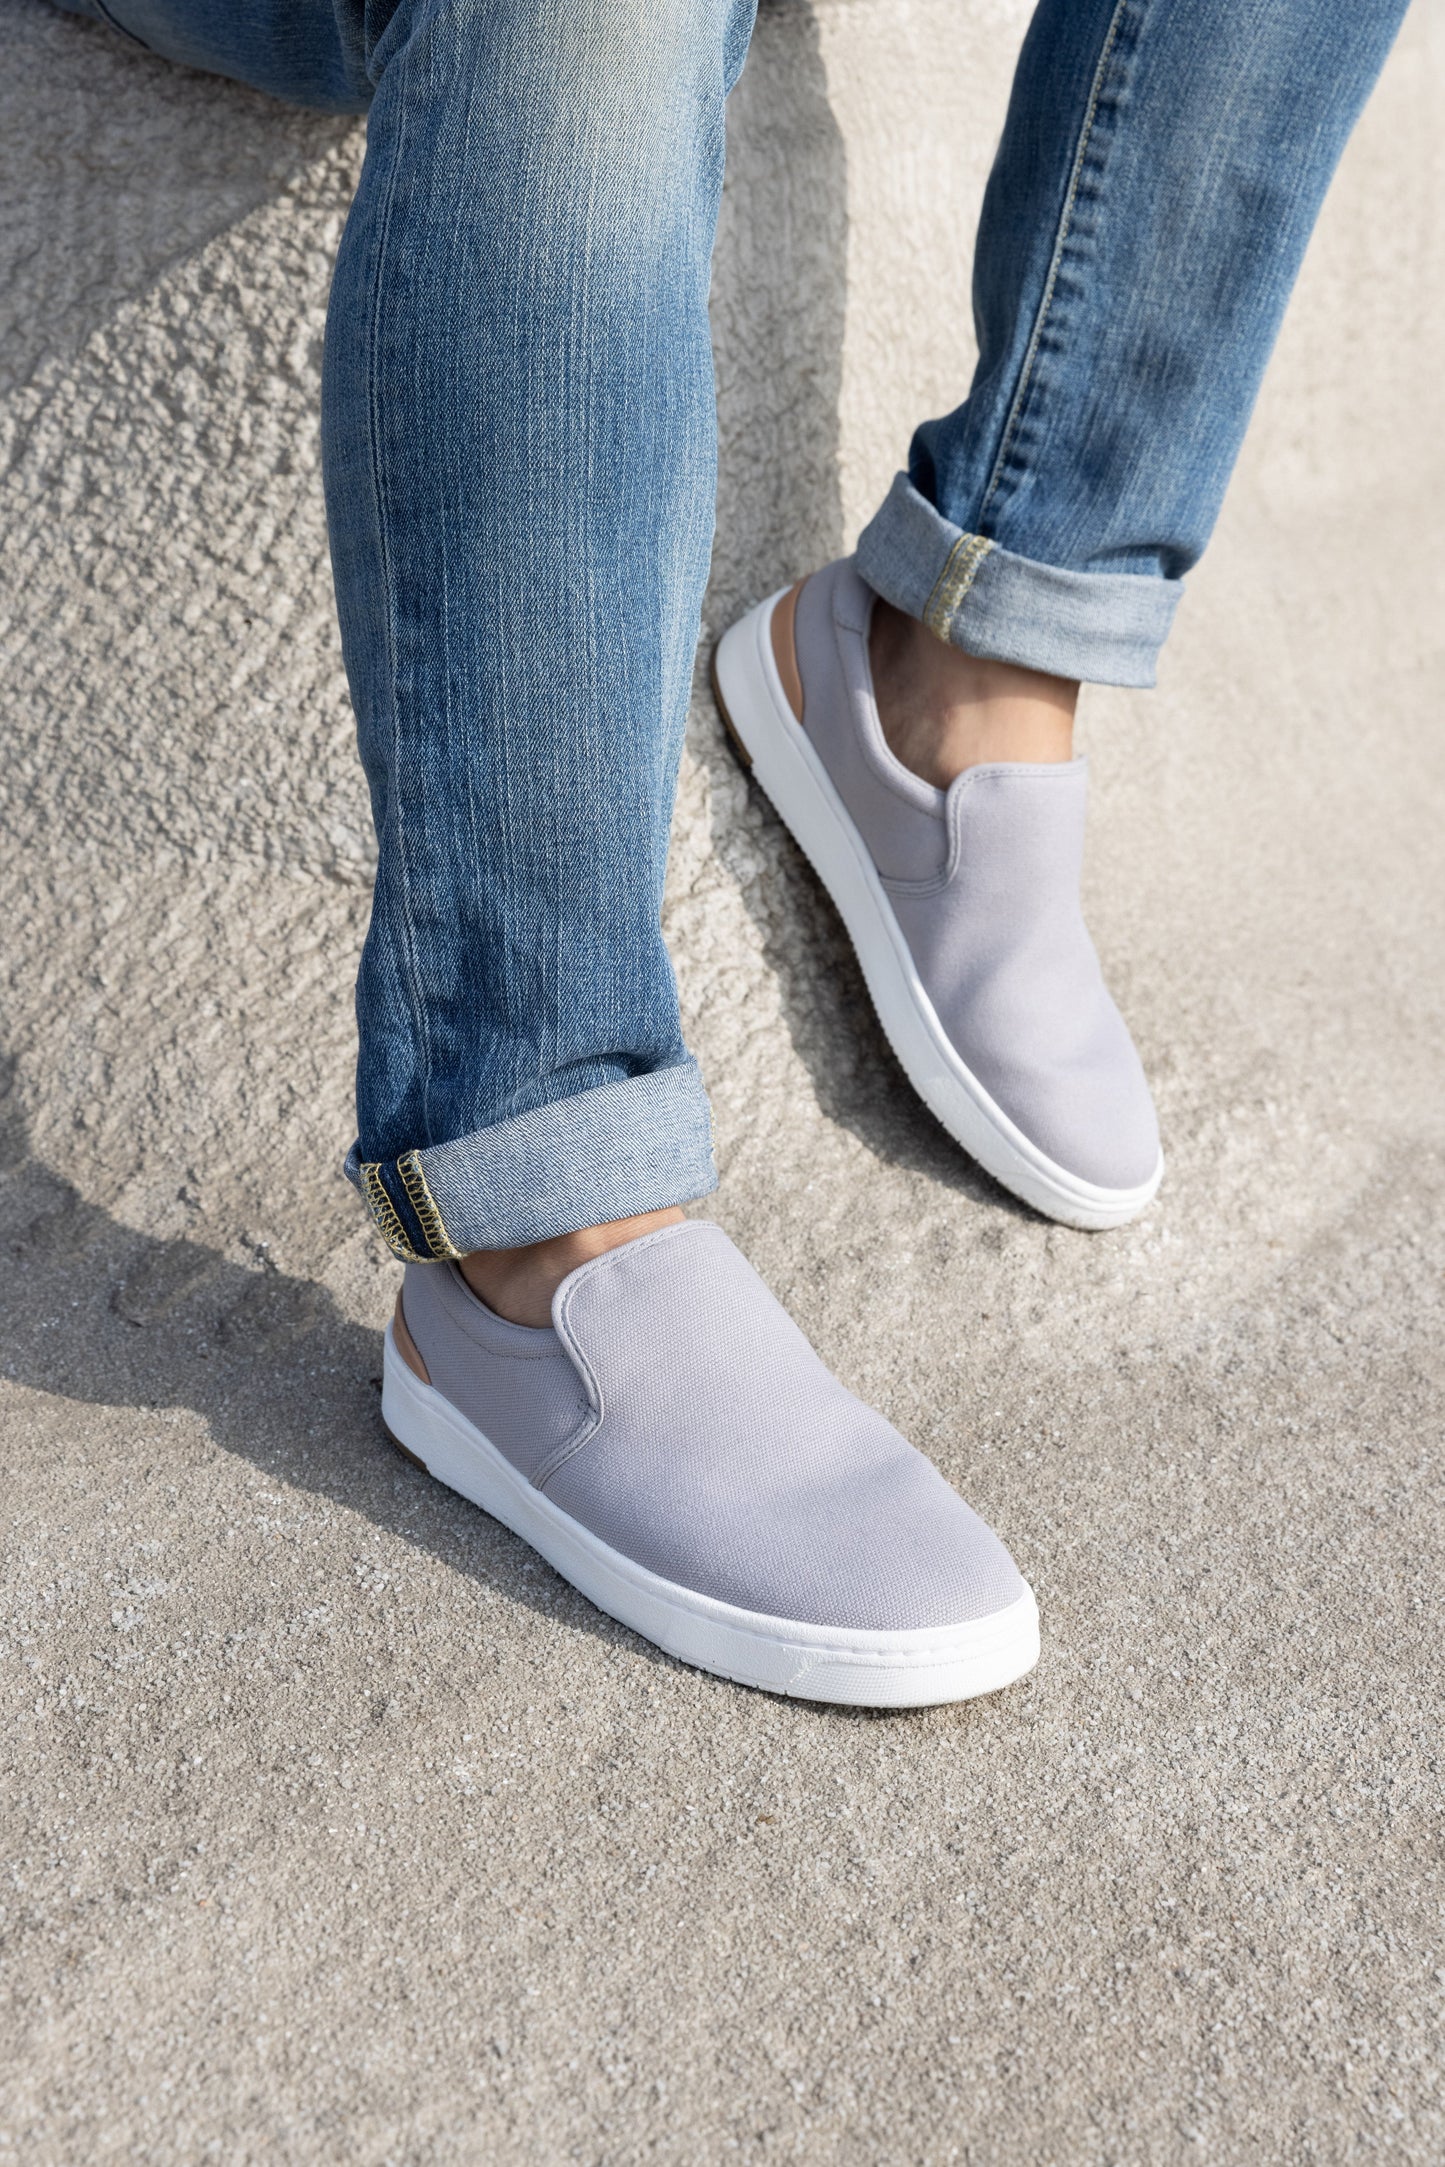 Trvl Lite Grey Slip-on Sneakers-TOMS® India Official Site